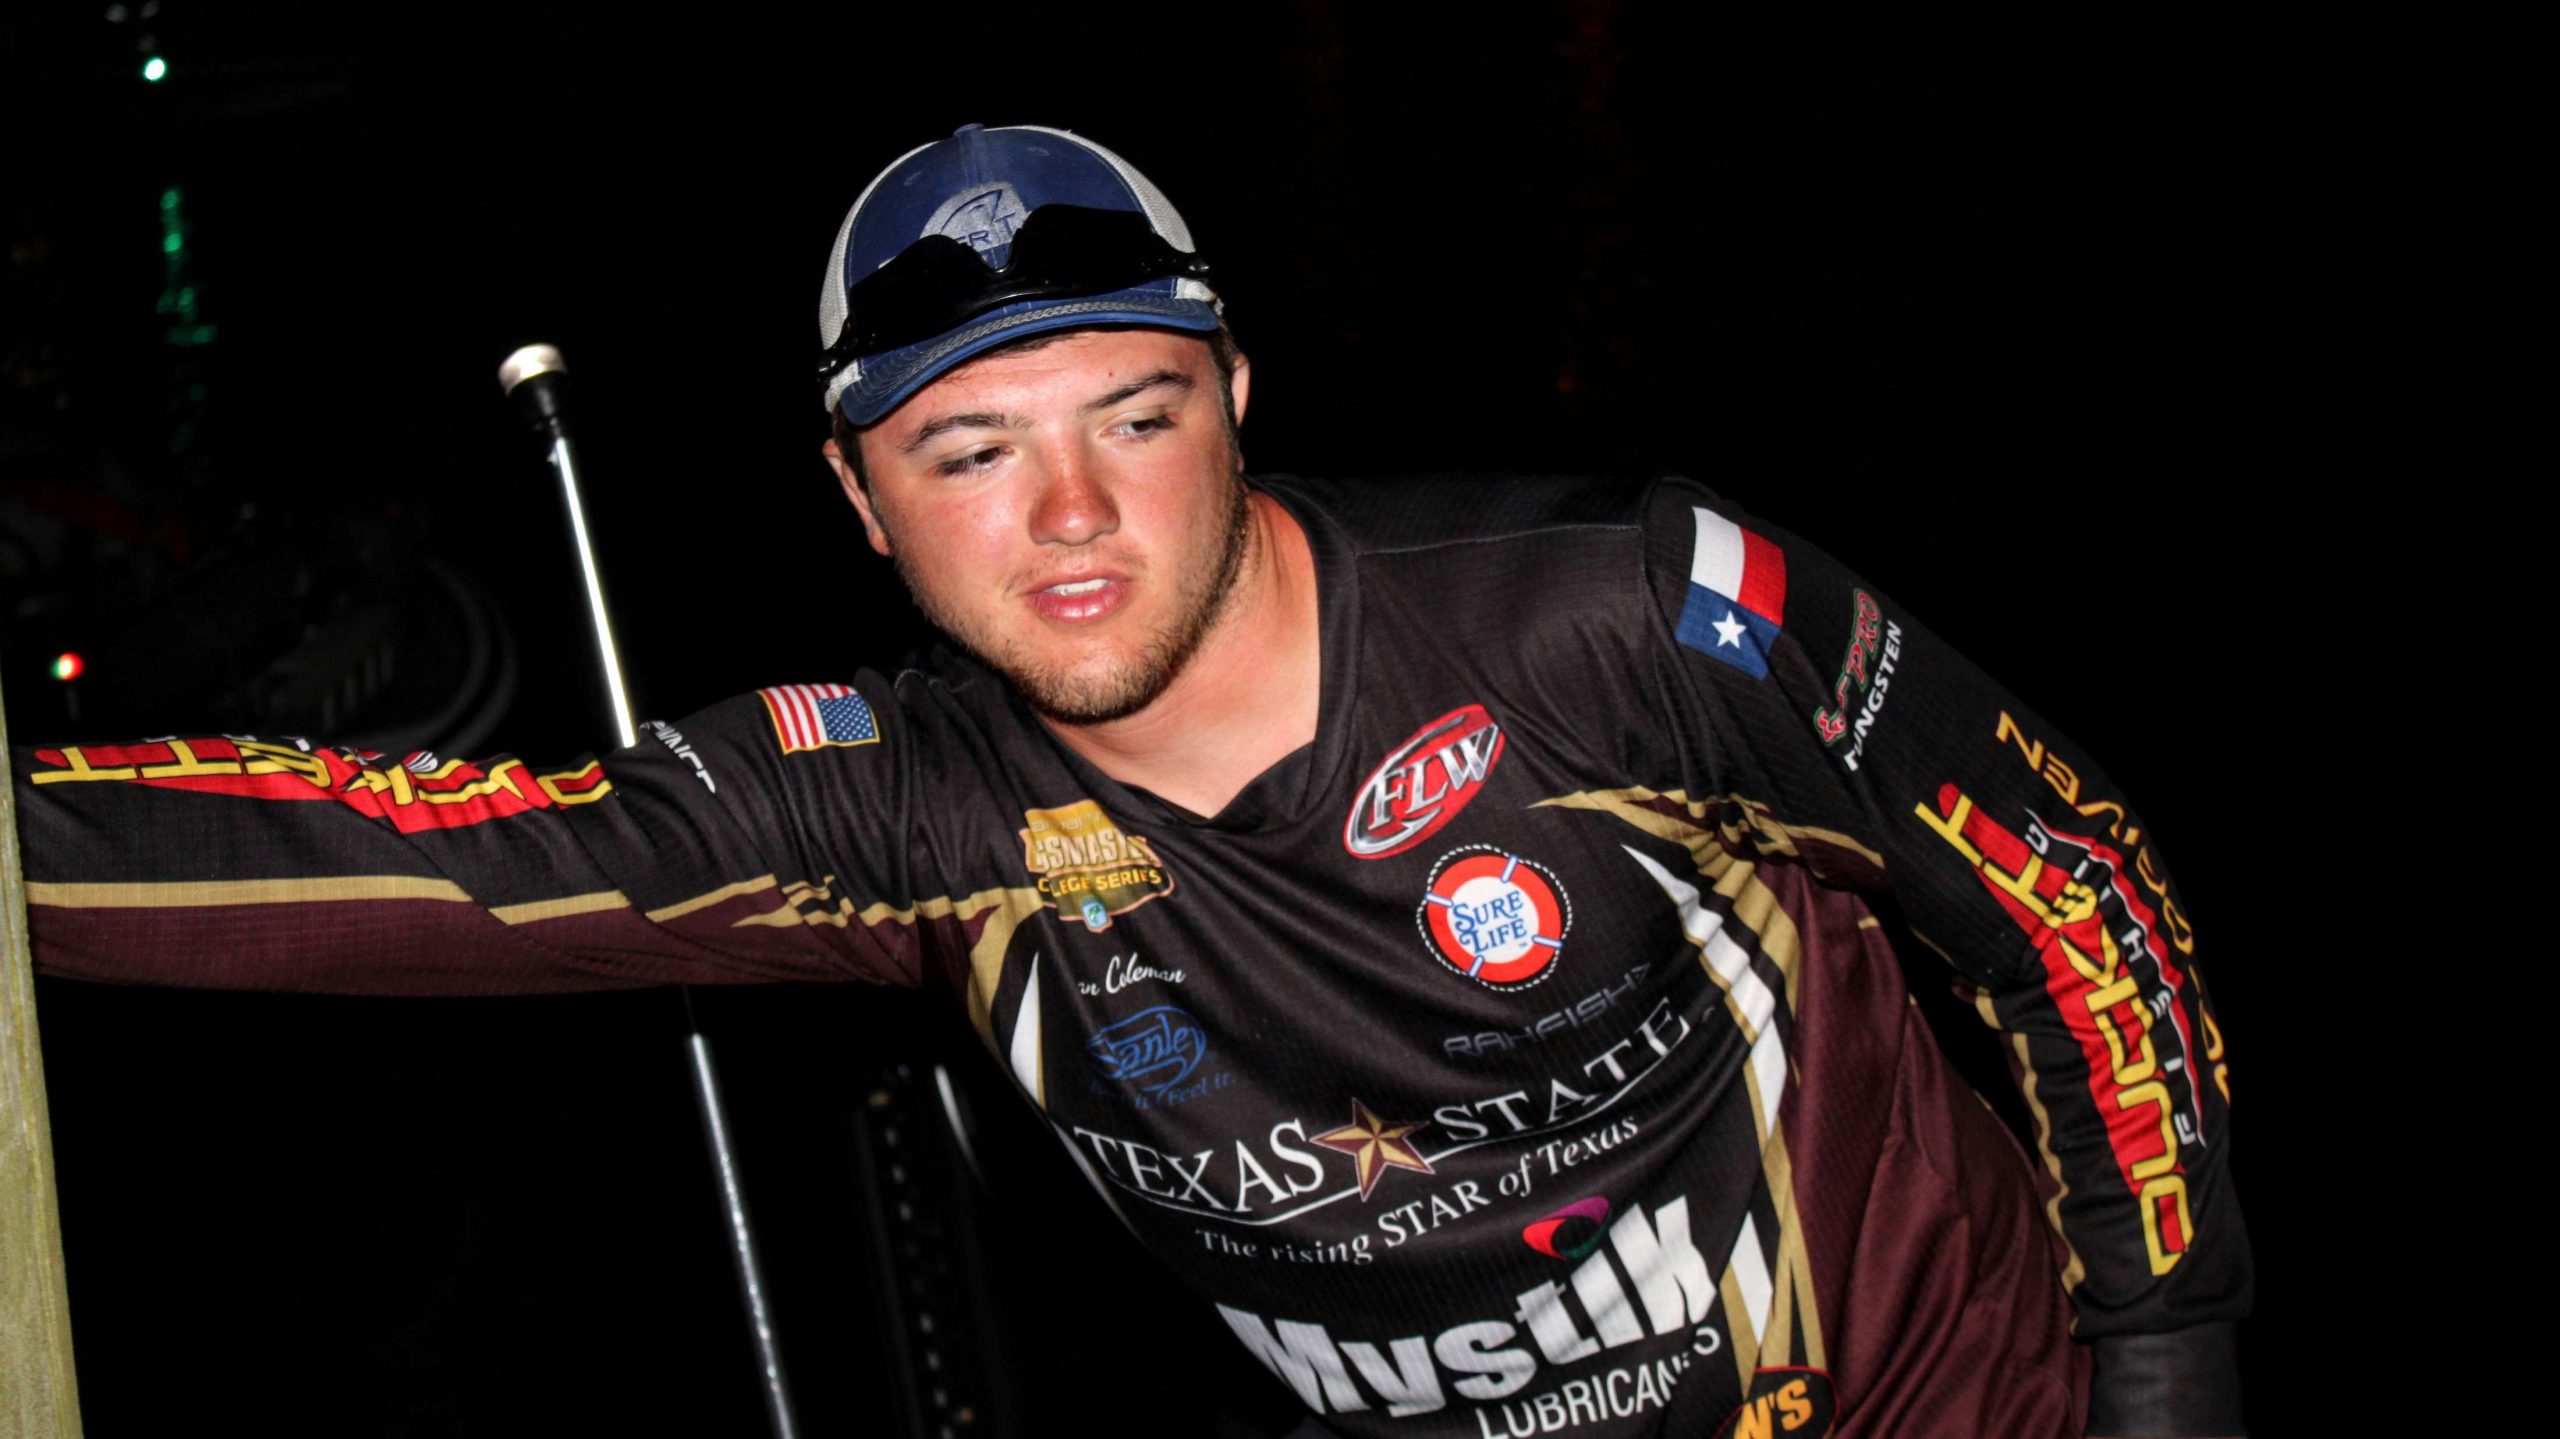 Evan Coleman also is hoping to make the 2017 Classic, which will take place close to his own home of Austin, Tex. The Texas State University angler is the No. 6 seed in the College Classic Bracket.